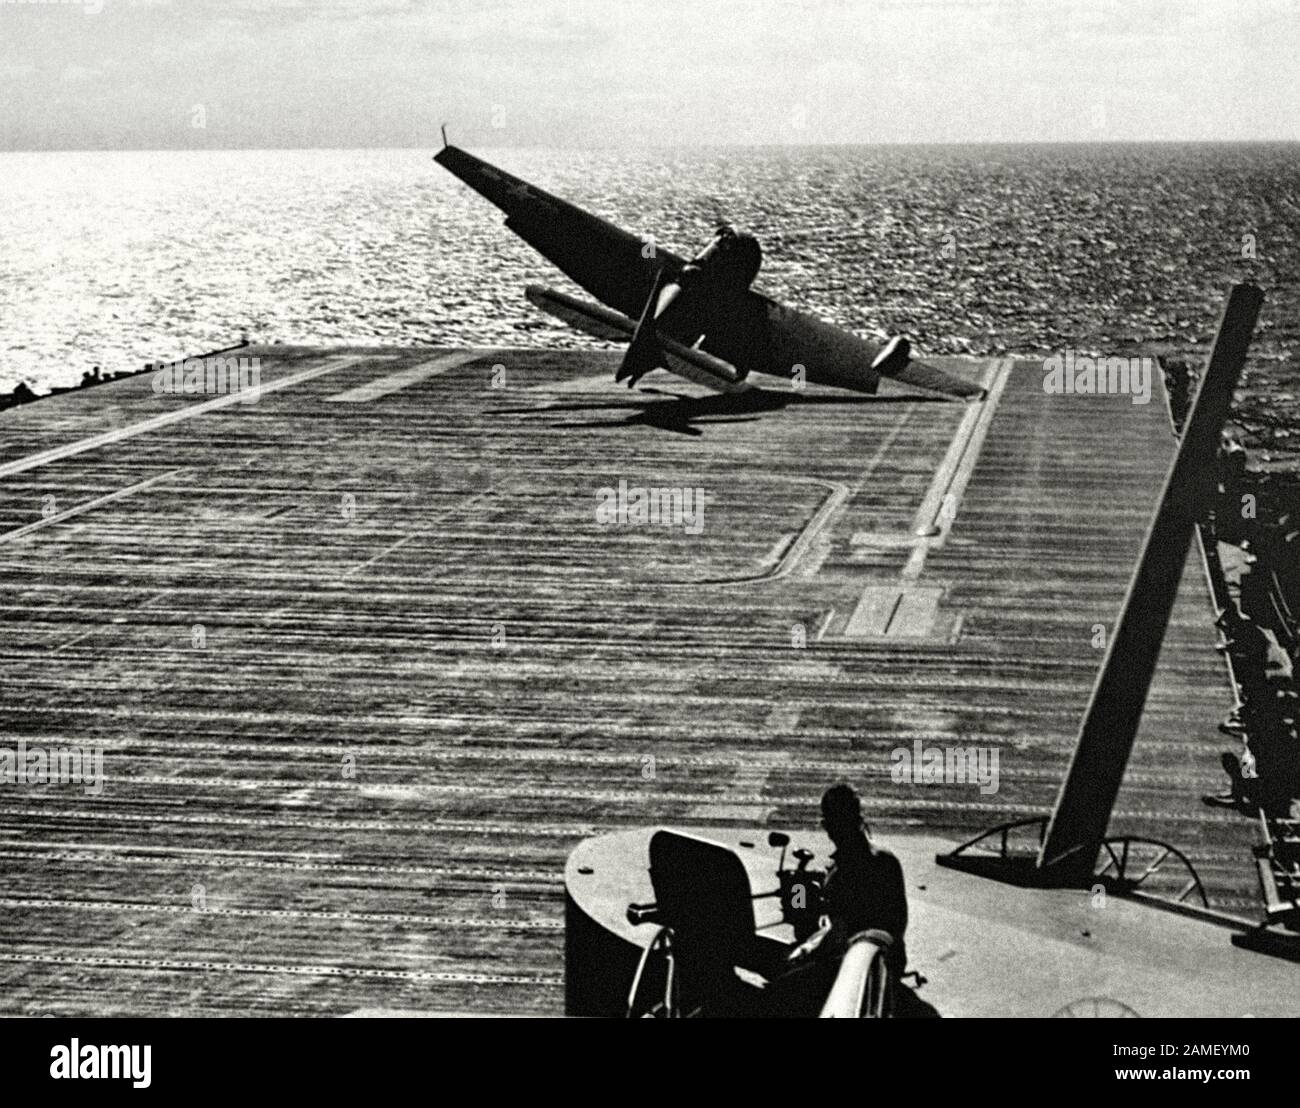 The photo shows the unsuccessful test take-off of the Grumman TBF Avenger torpedo bomber from desk of the Ticonderoga aircraft carrier. Pacific. July Stock Photo